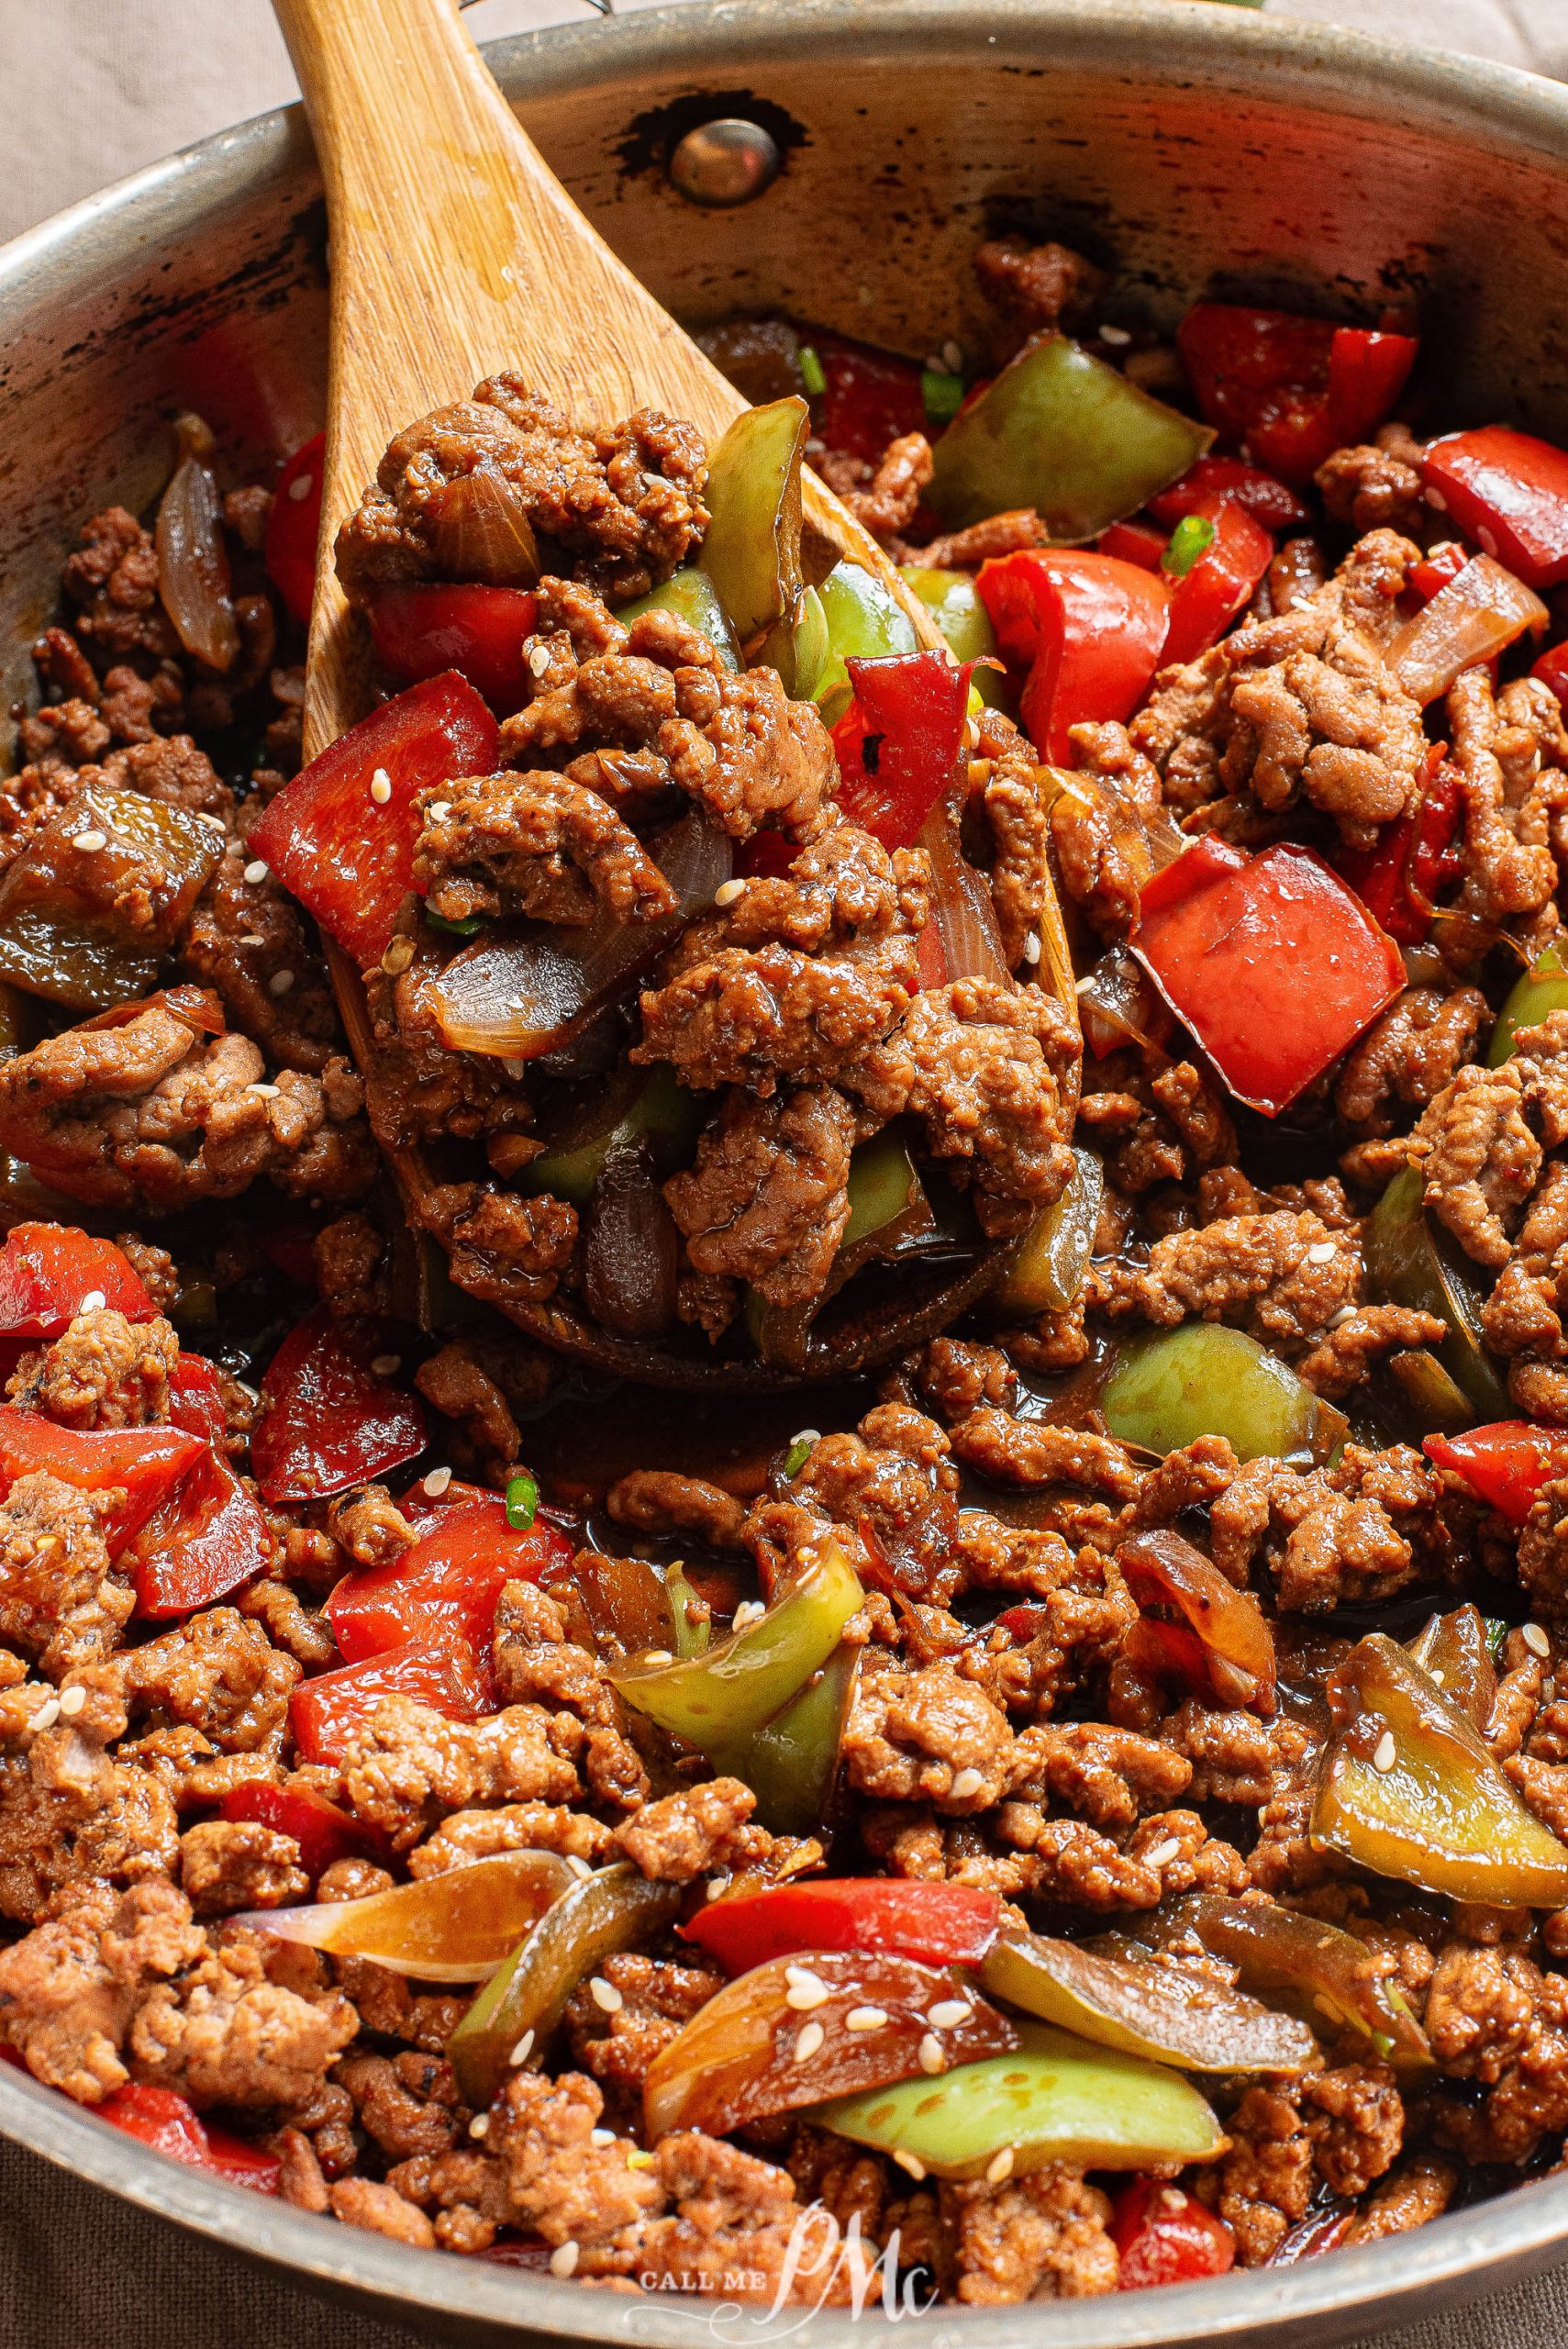 A skillet filled with meat and peppers.